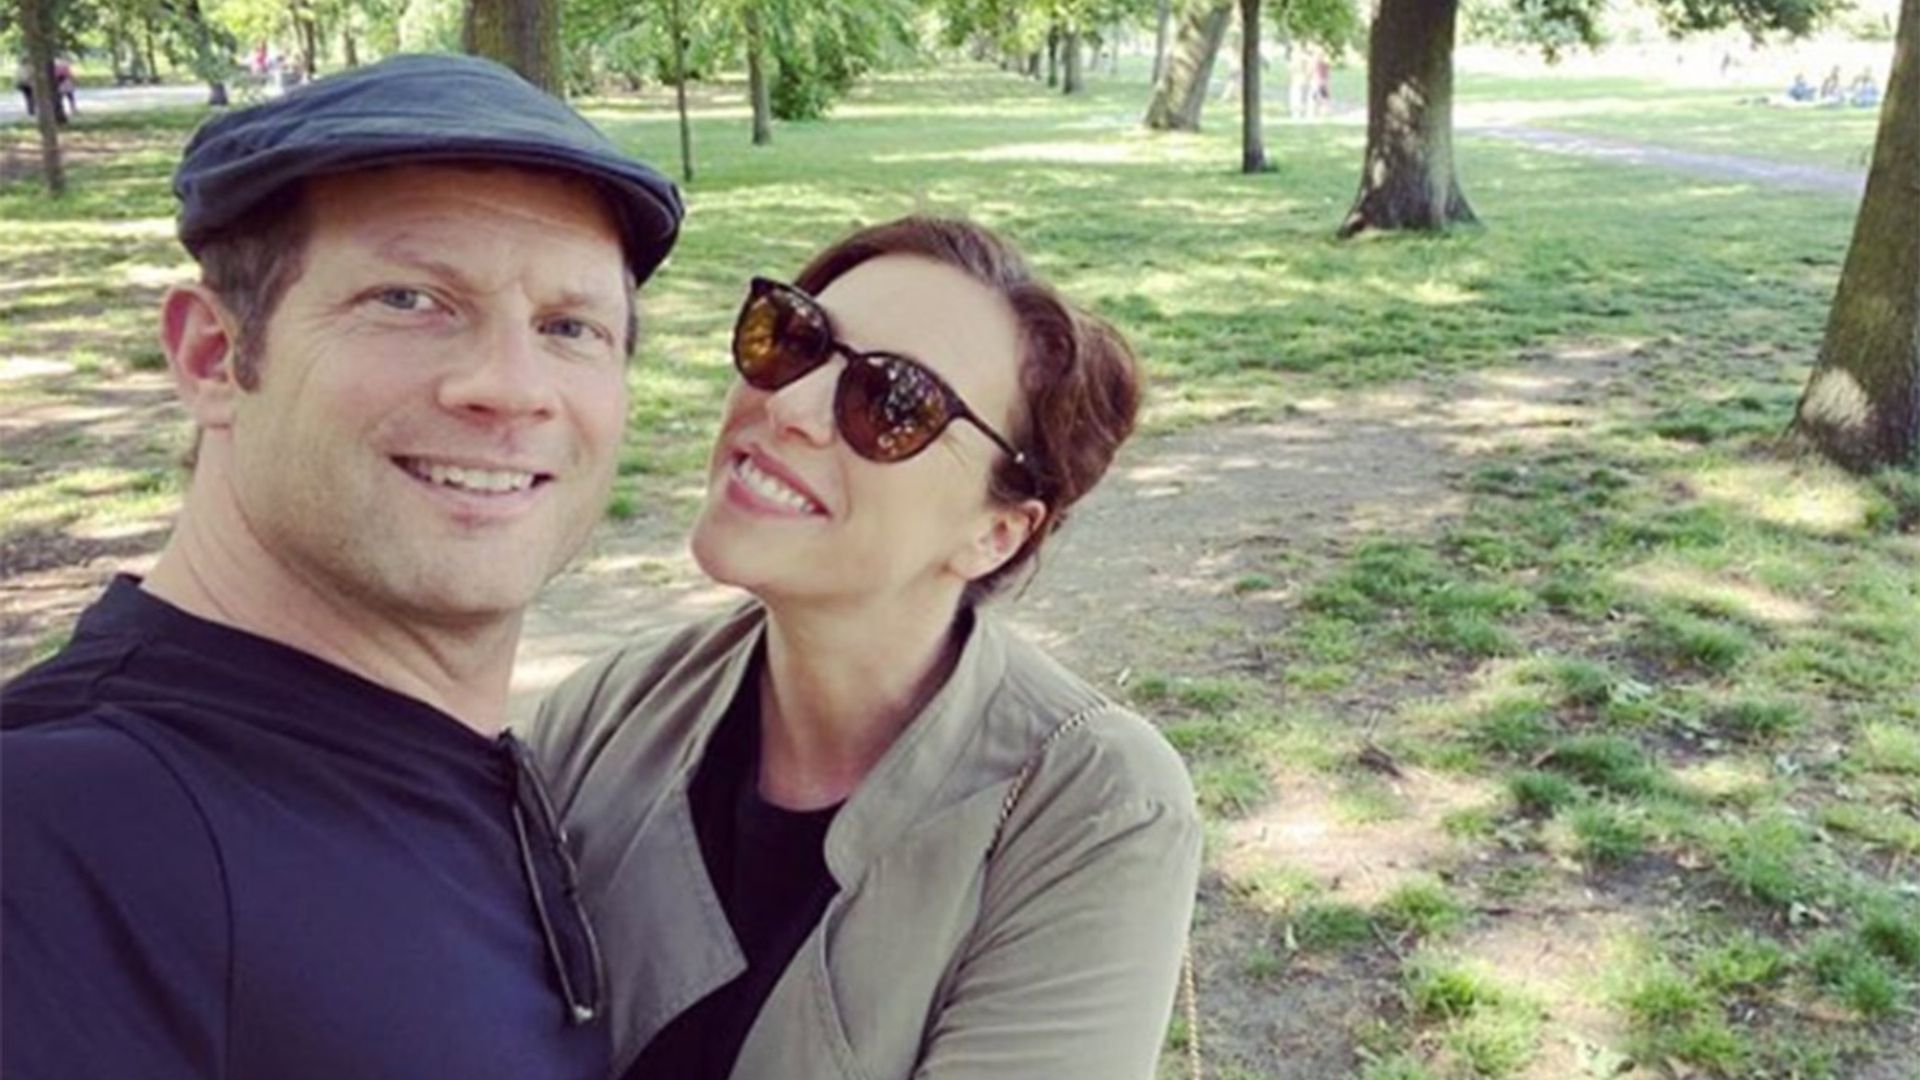 Dermot O'Leary's wife shares brand new photo of baby son Kasper